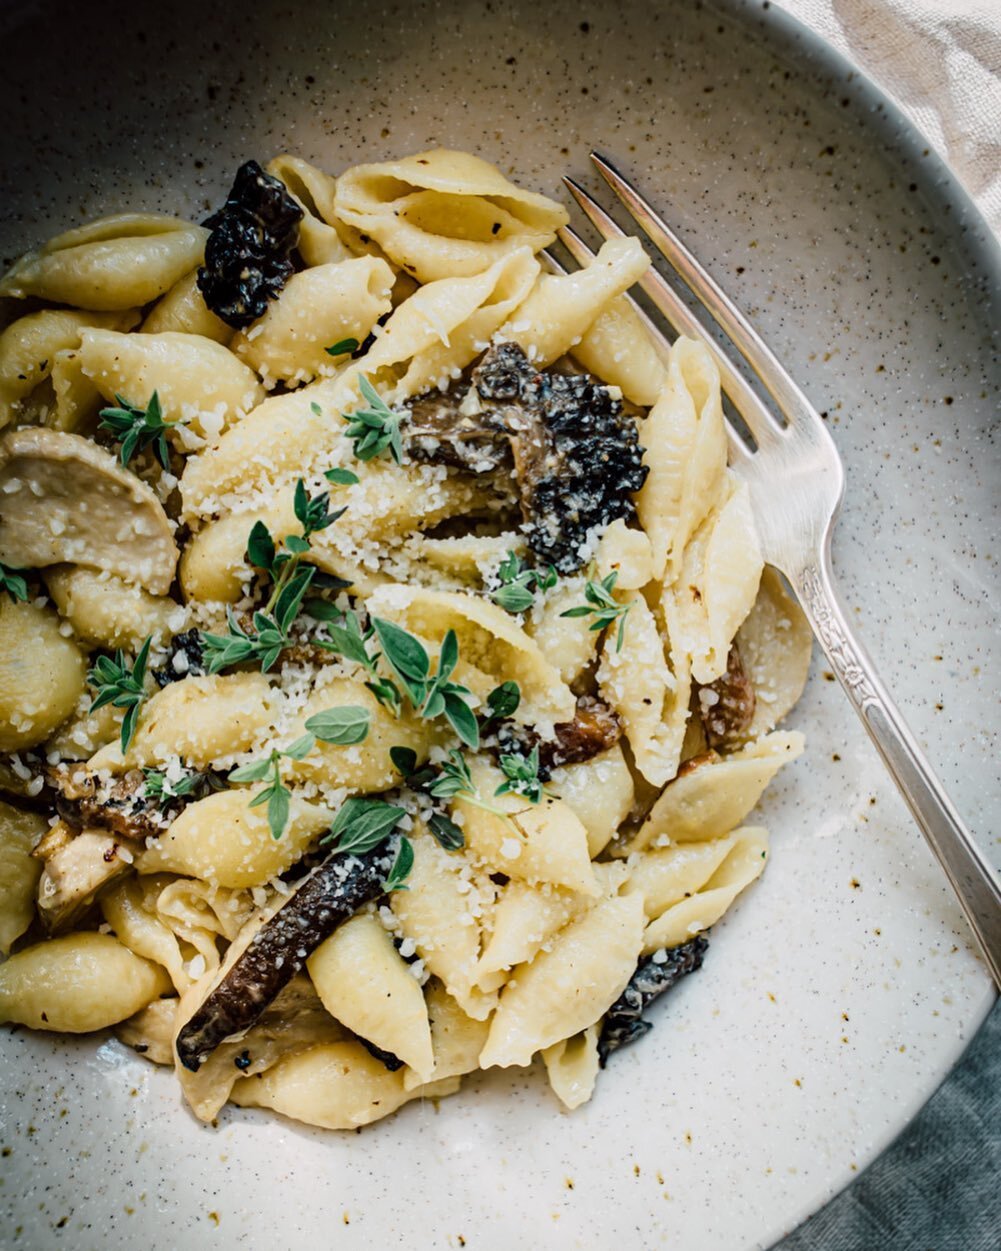 New post on the blog today with this Creamy Mushroom Pasta dish. The mushrooms are grown by @harvestmoonmush right here in Portland! One of the great things about being a vendor at @woodlawnfarmersmarket is discovering all these food treasures. More 